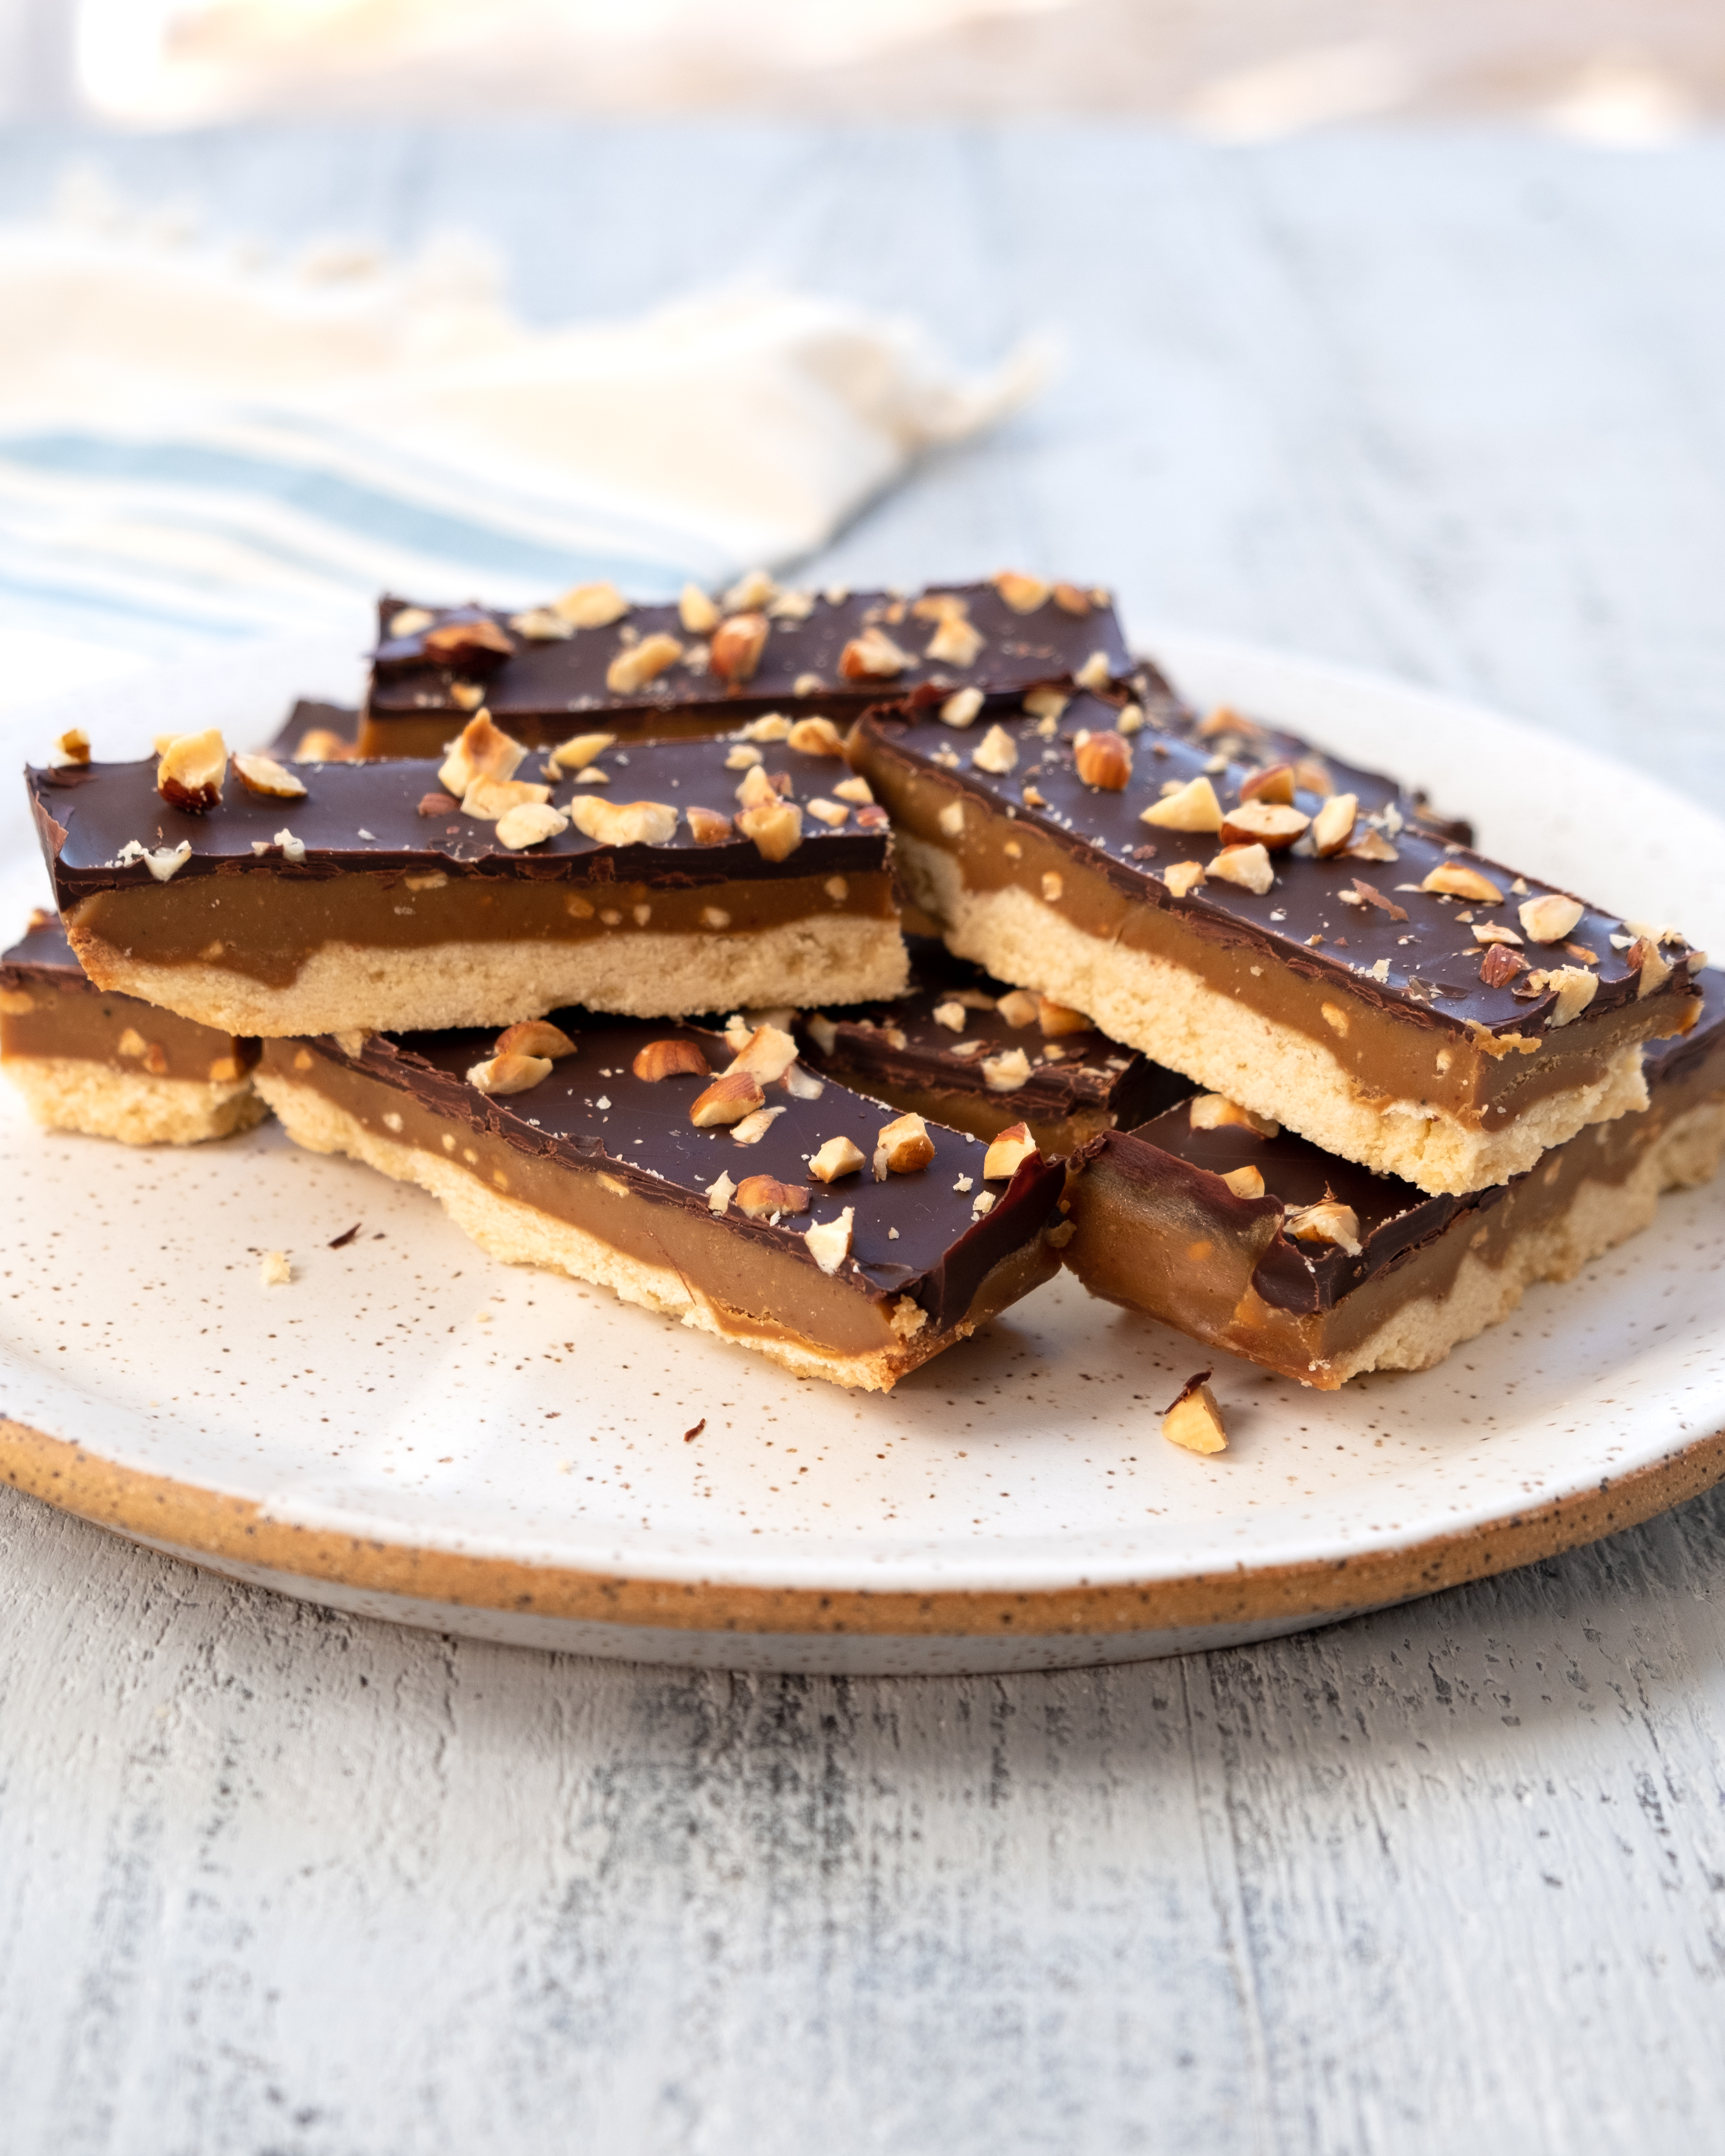 Salted Caramel Twix Are Coming, So Prepare For A Sugar High